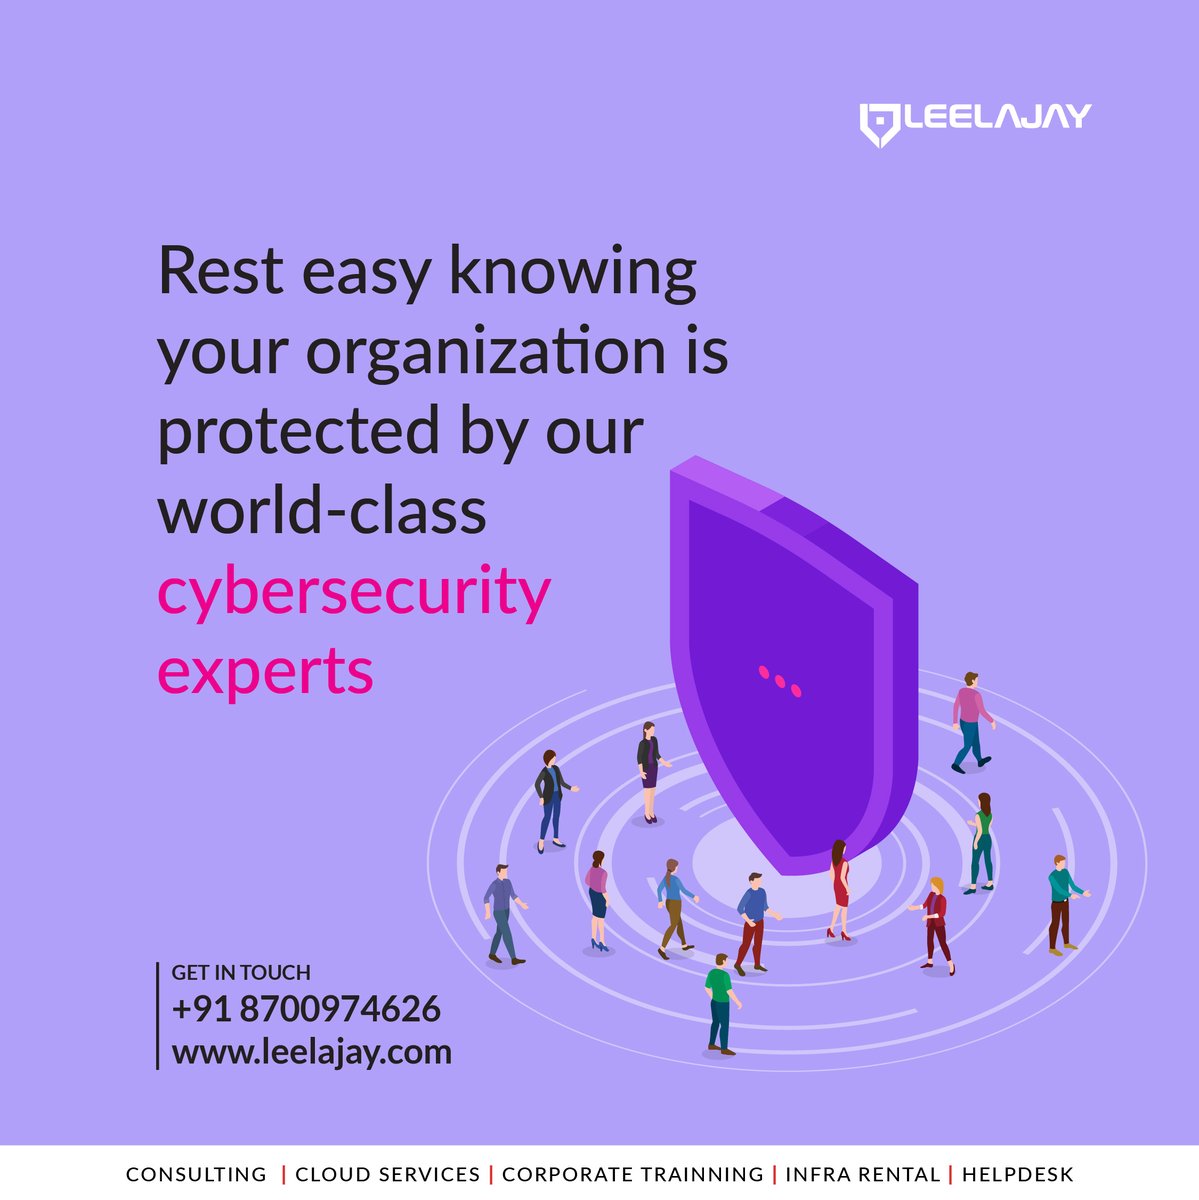 Redefine your security posture, safeguard your critical business systems, information, and keep your employees’ awareness high regarding phishing & social engineering with our robust cybersecurity services.
#cybersecurity #leelajaytechnologies #cyberattack #ITSecurity  #cyber